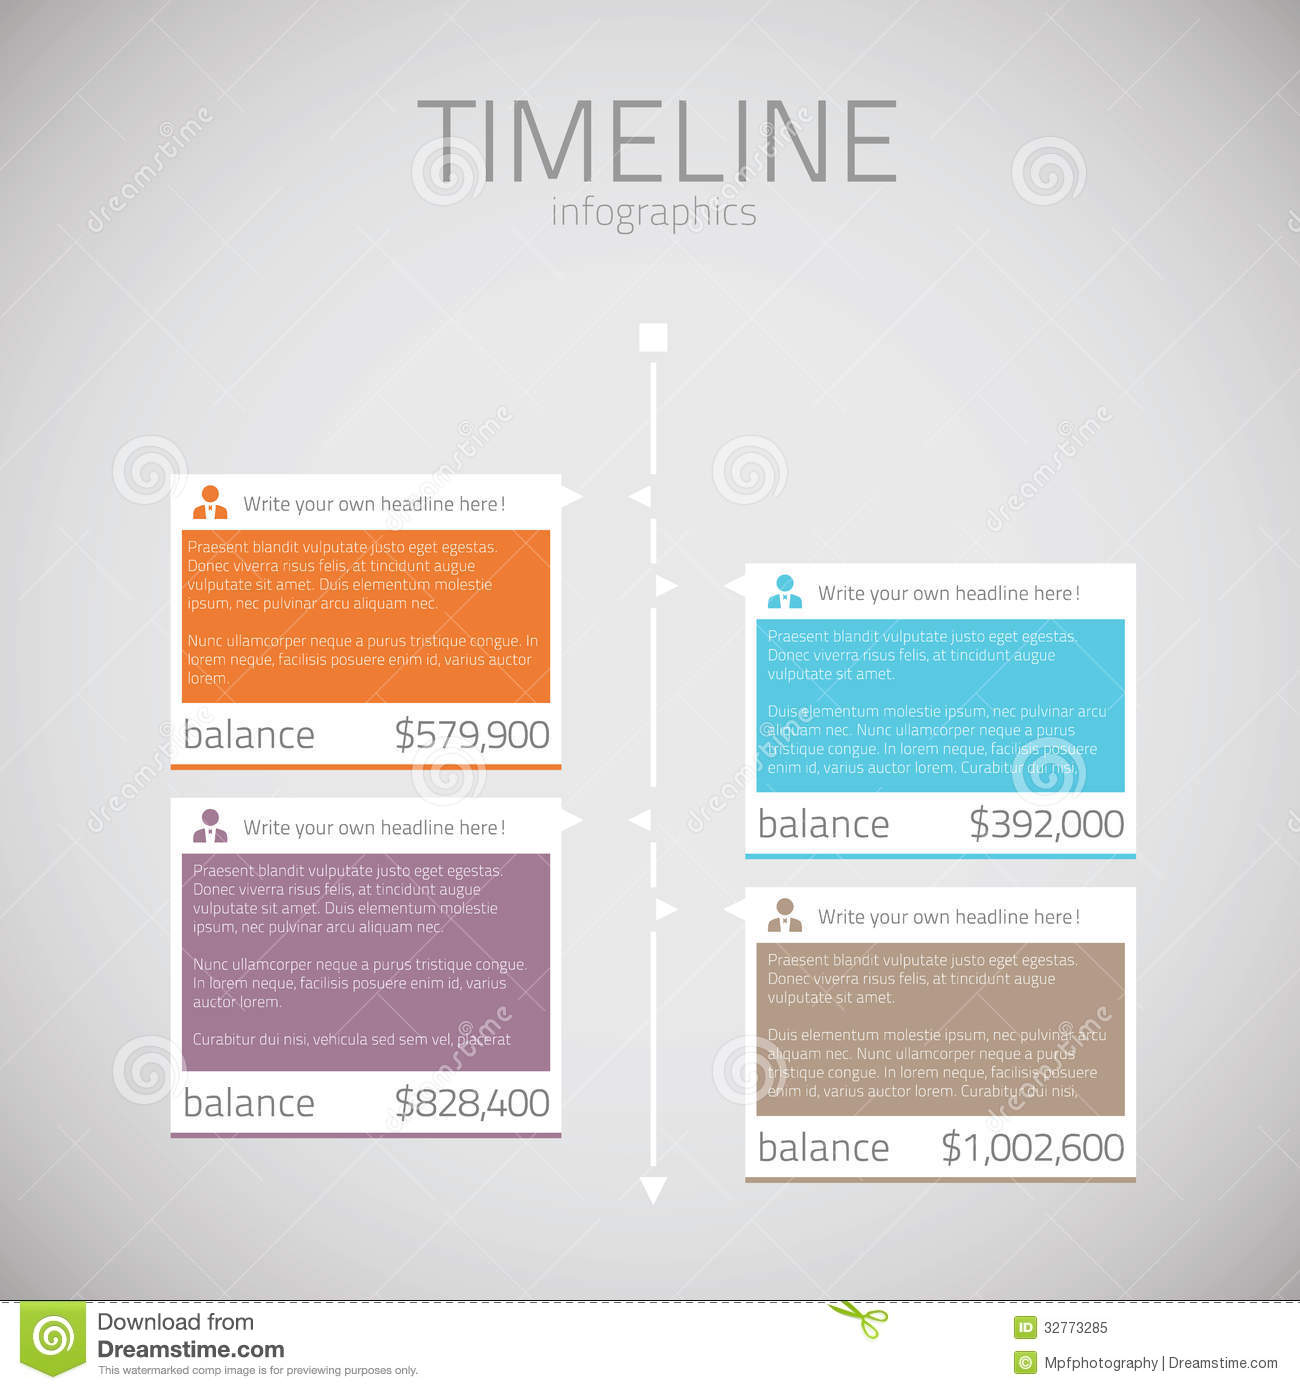 Free Infographic Templates Timeline